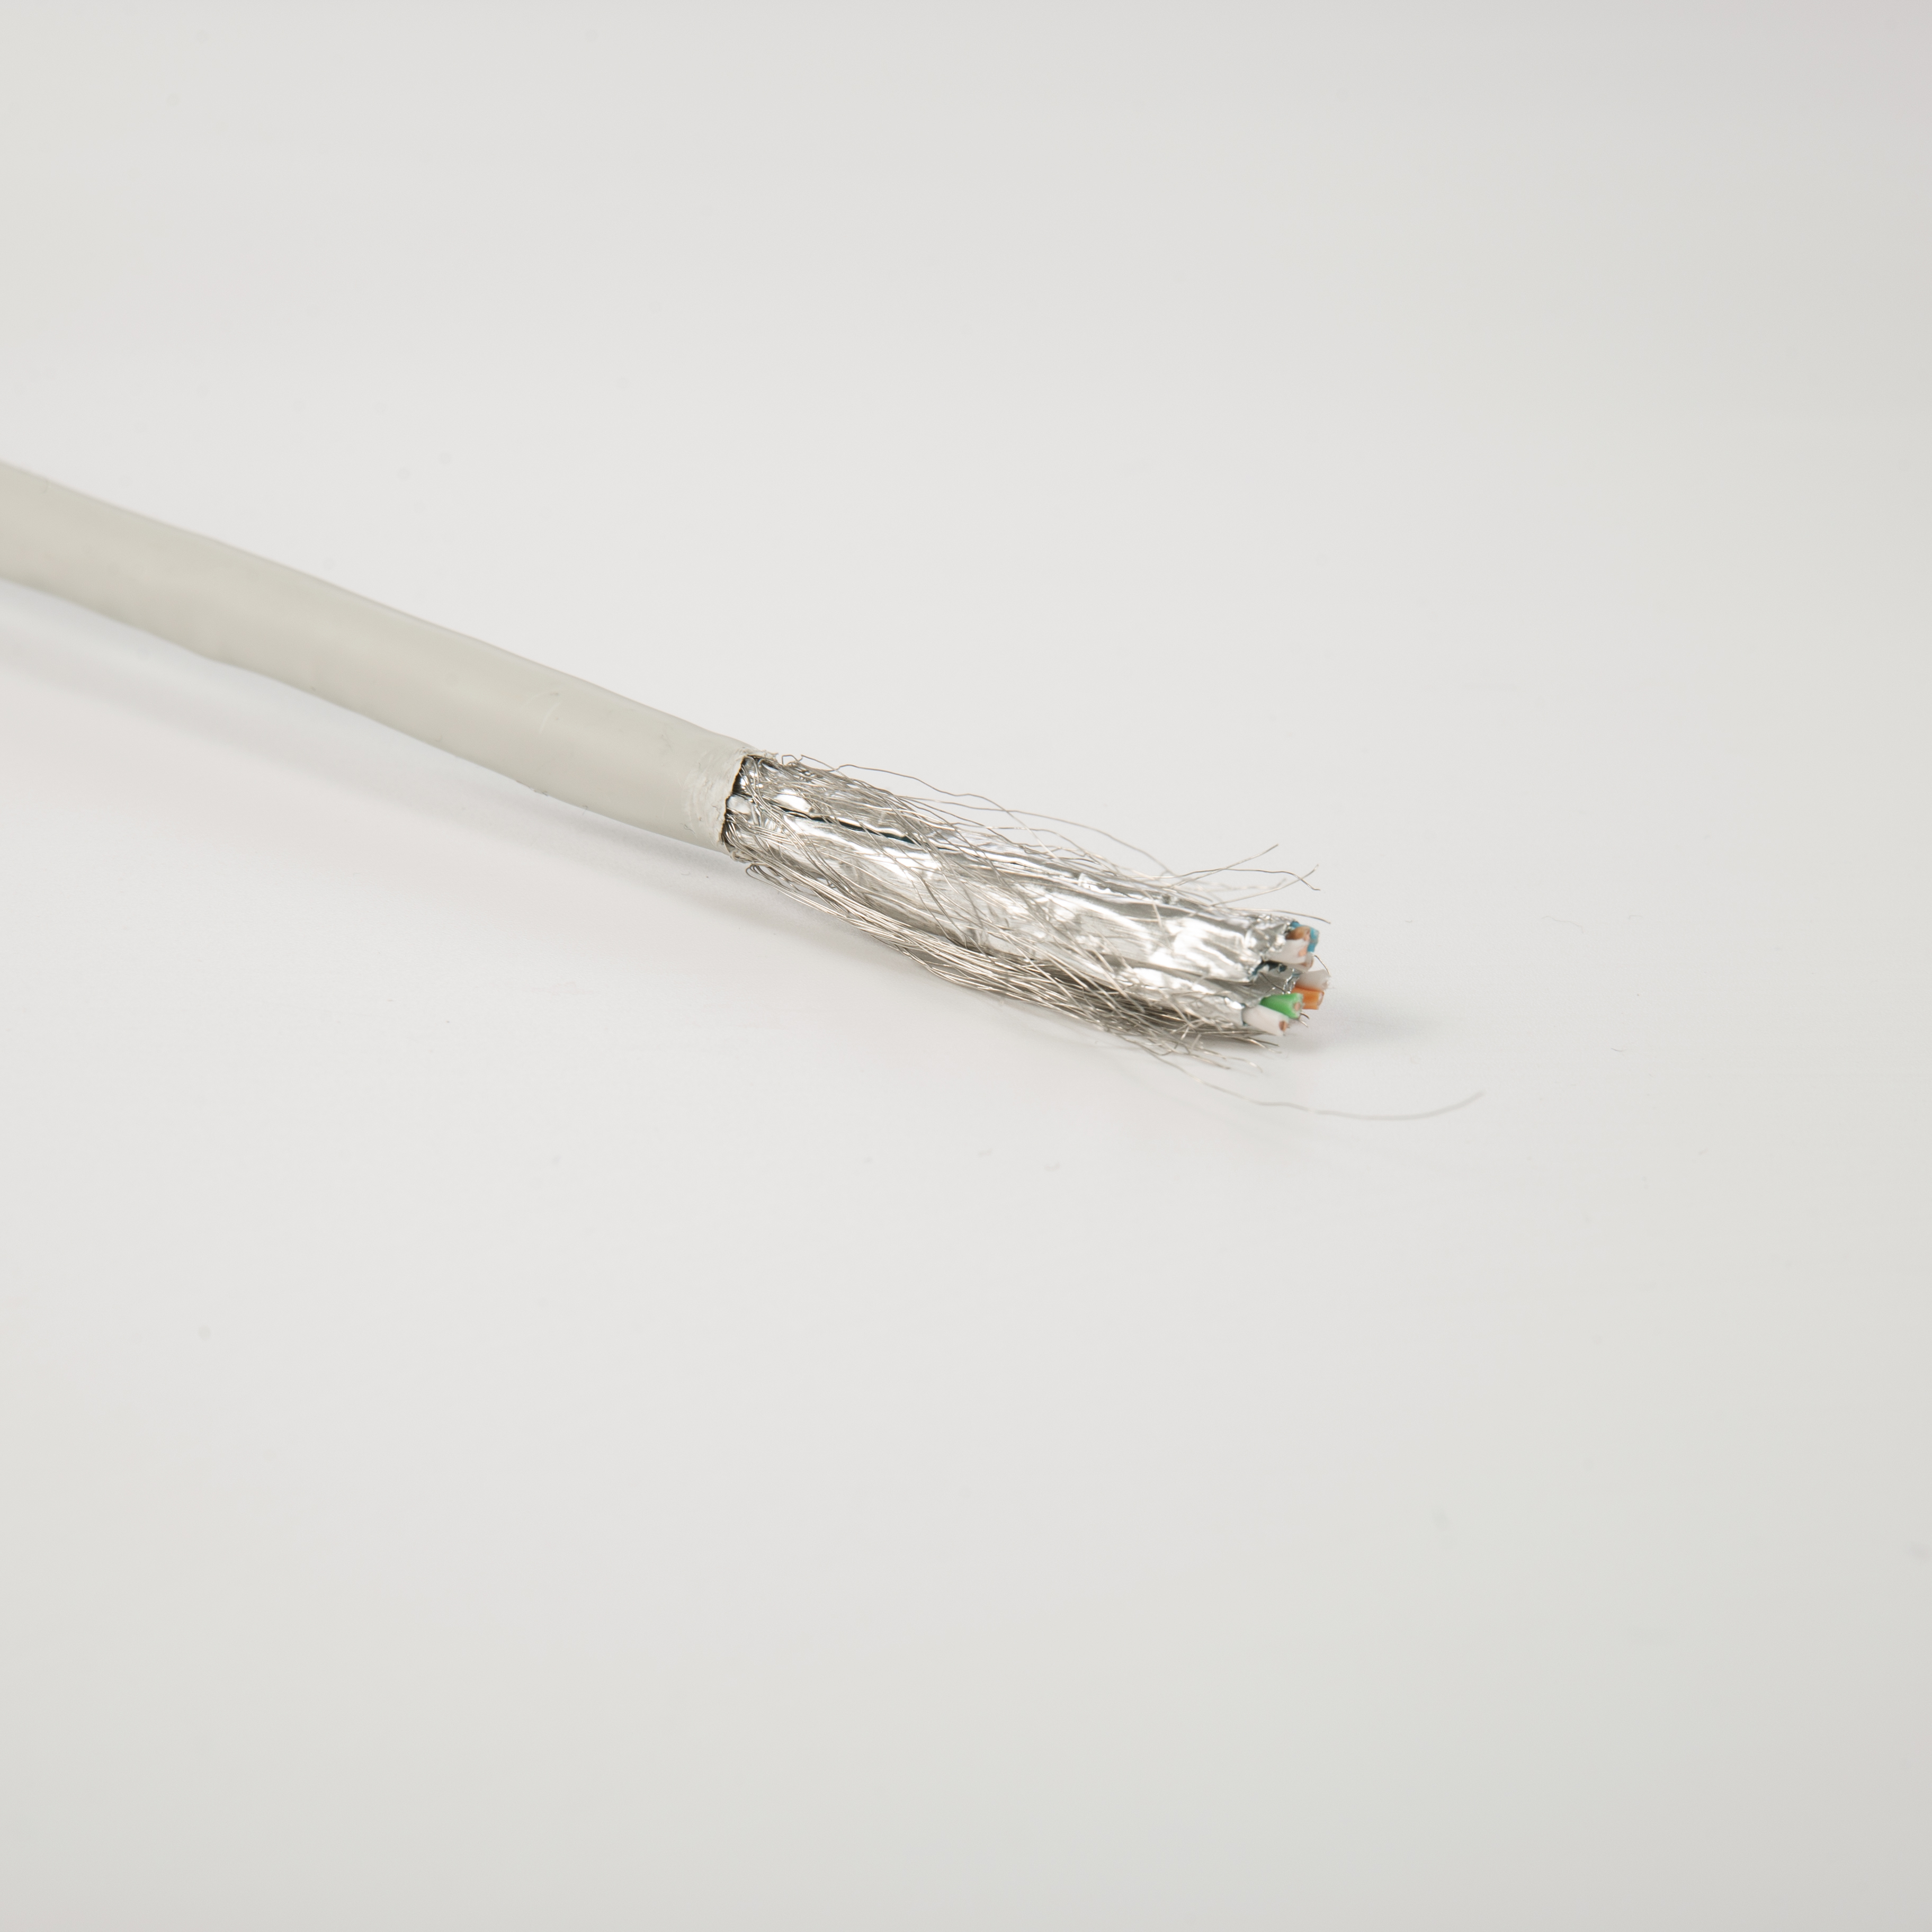 LAN Cable – CAT6e (shielded)